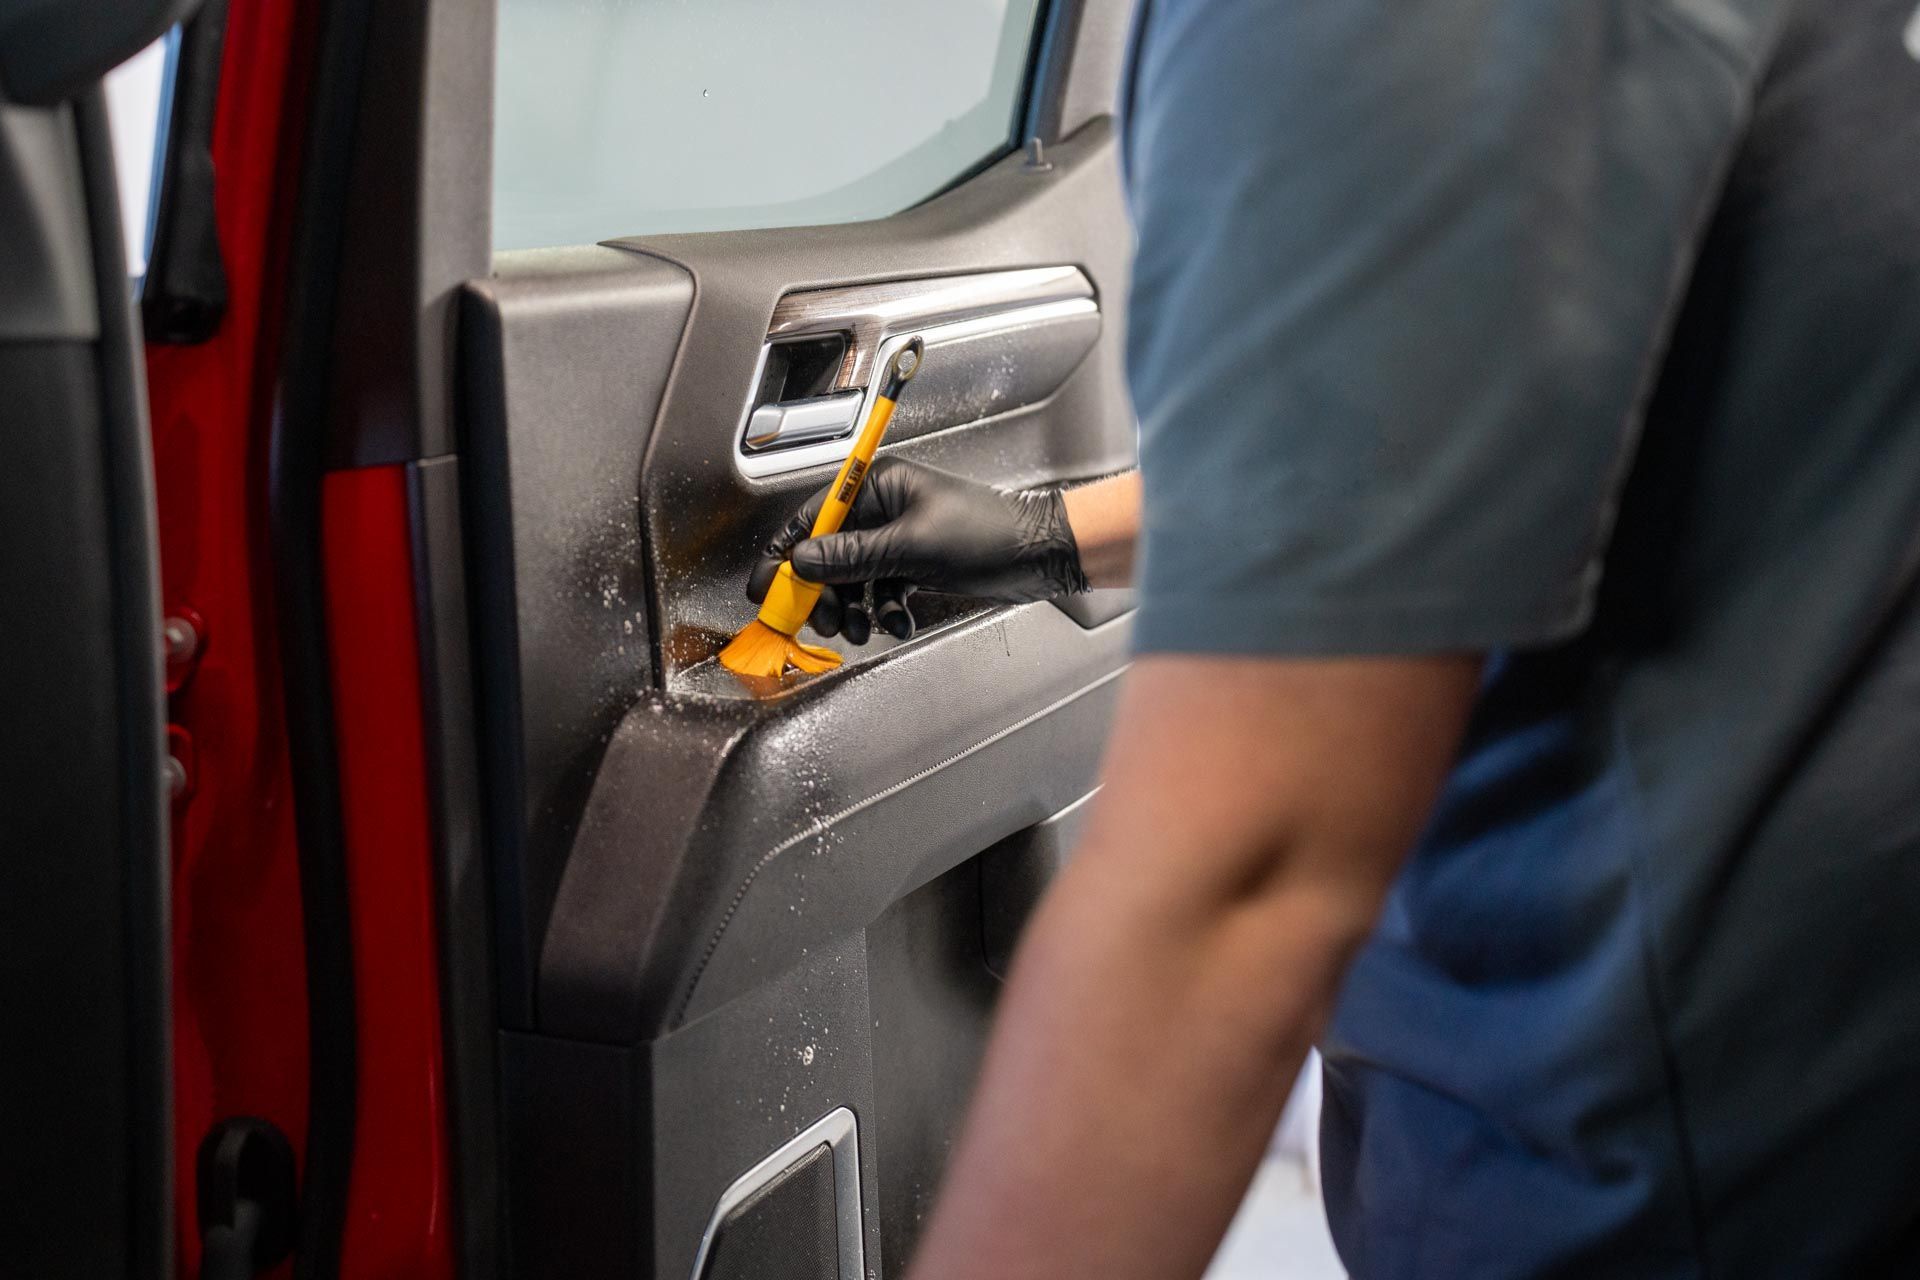 Interior Detailing - A man is cleaning the inside of a car door with a brush.